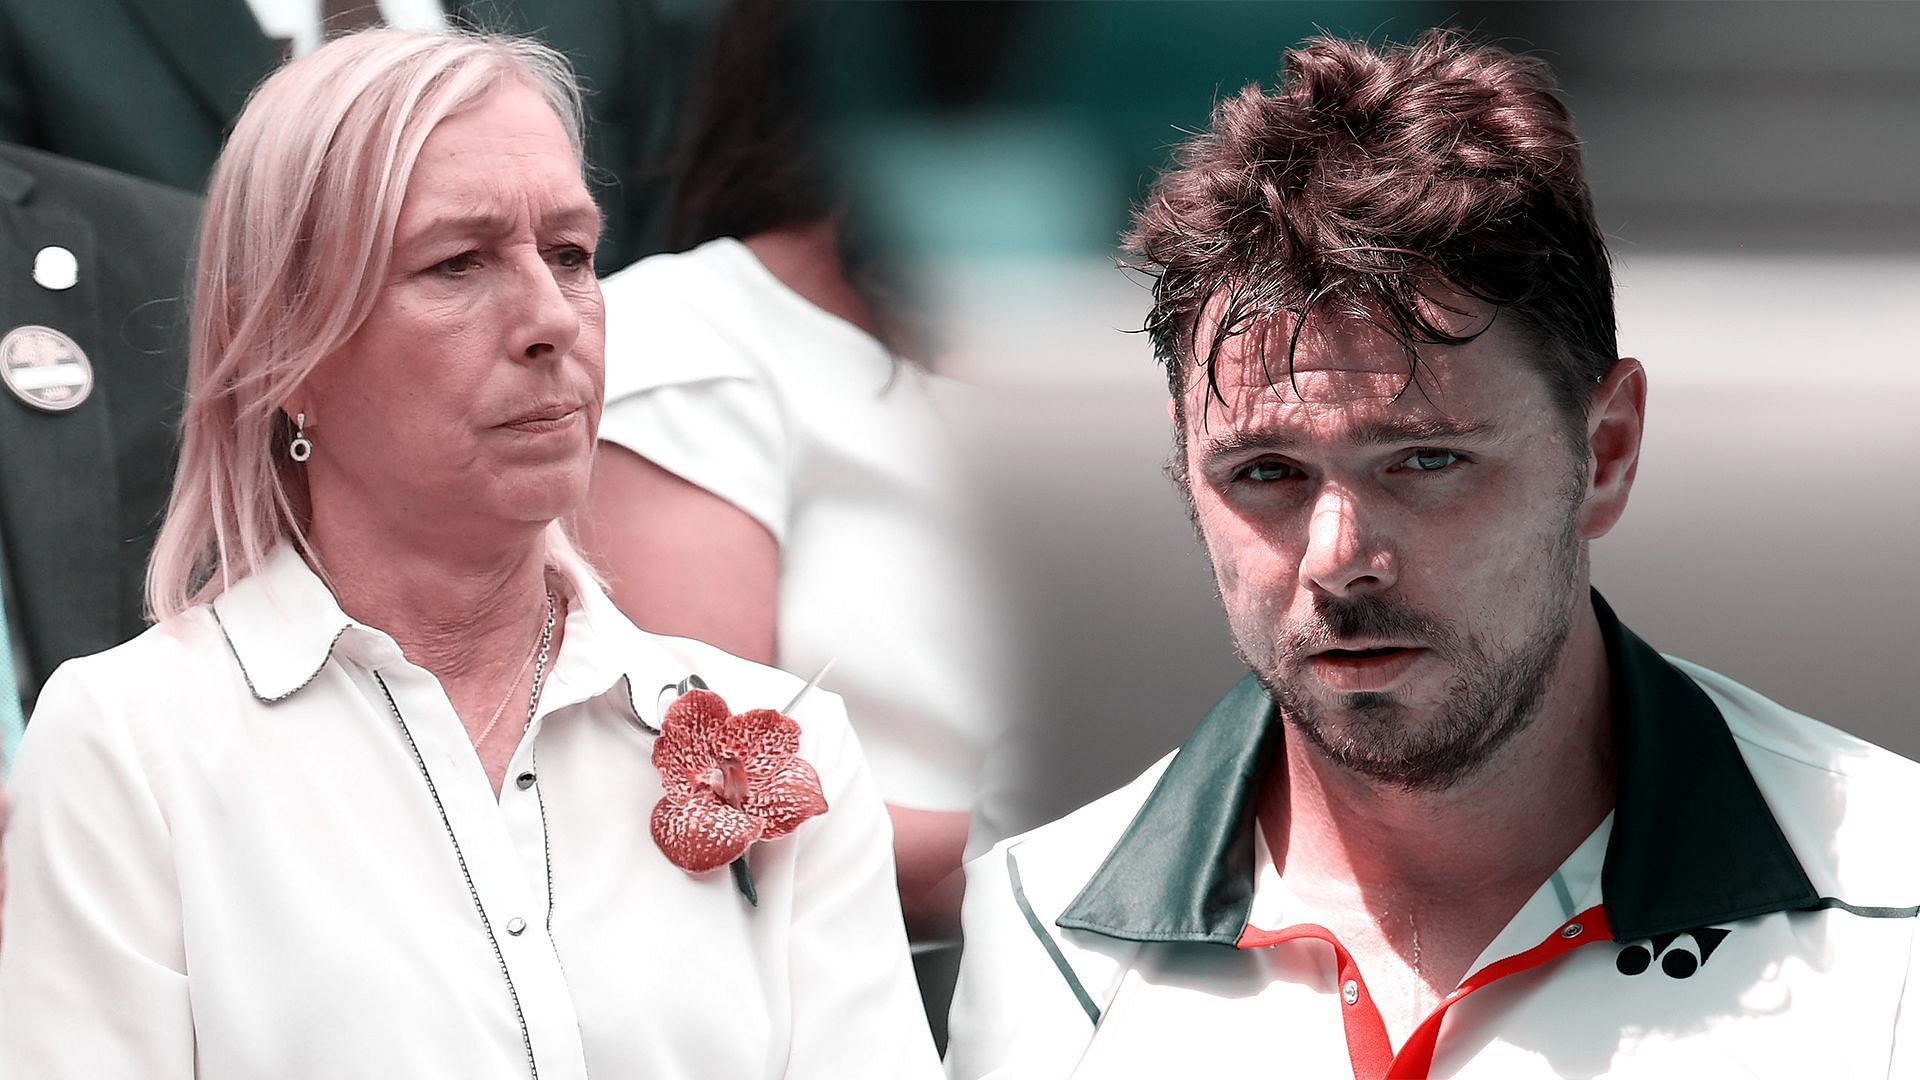 Stan Wawrinka and Martina Navratilova were among the ones who reacted to the video of a father assaulting his daughter